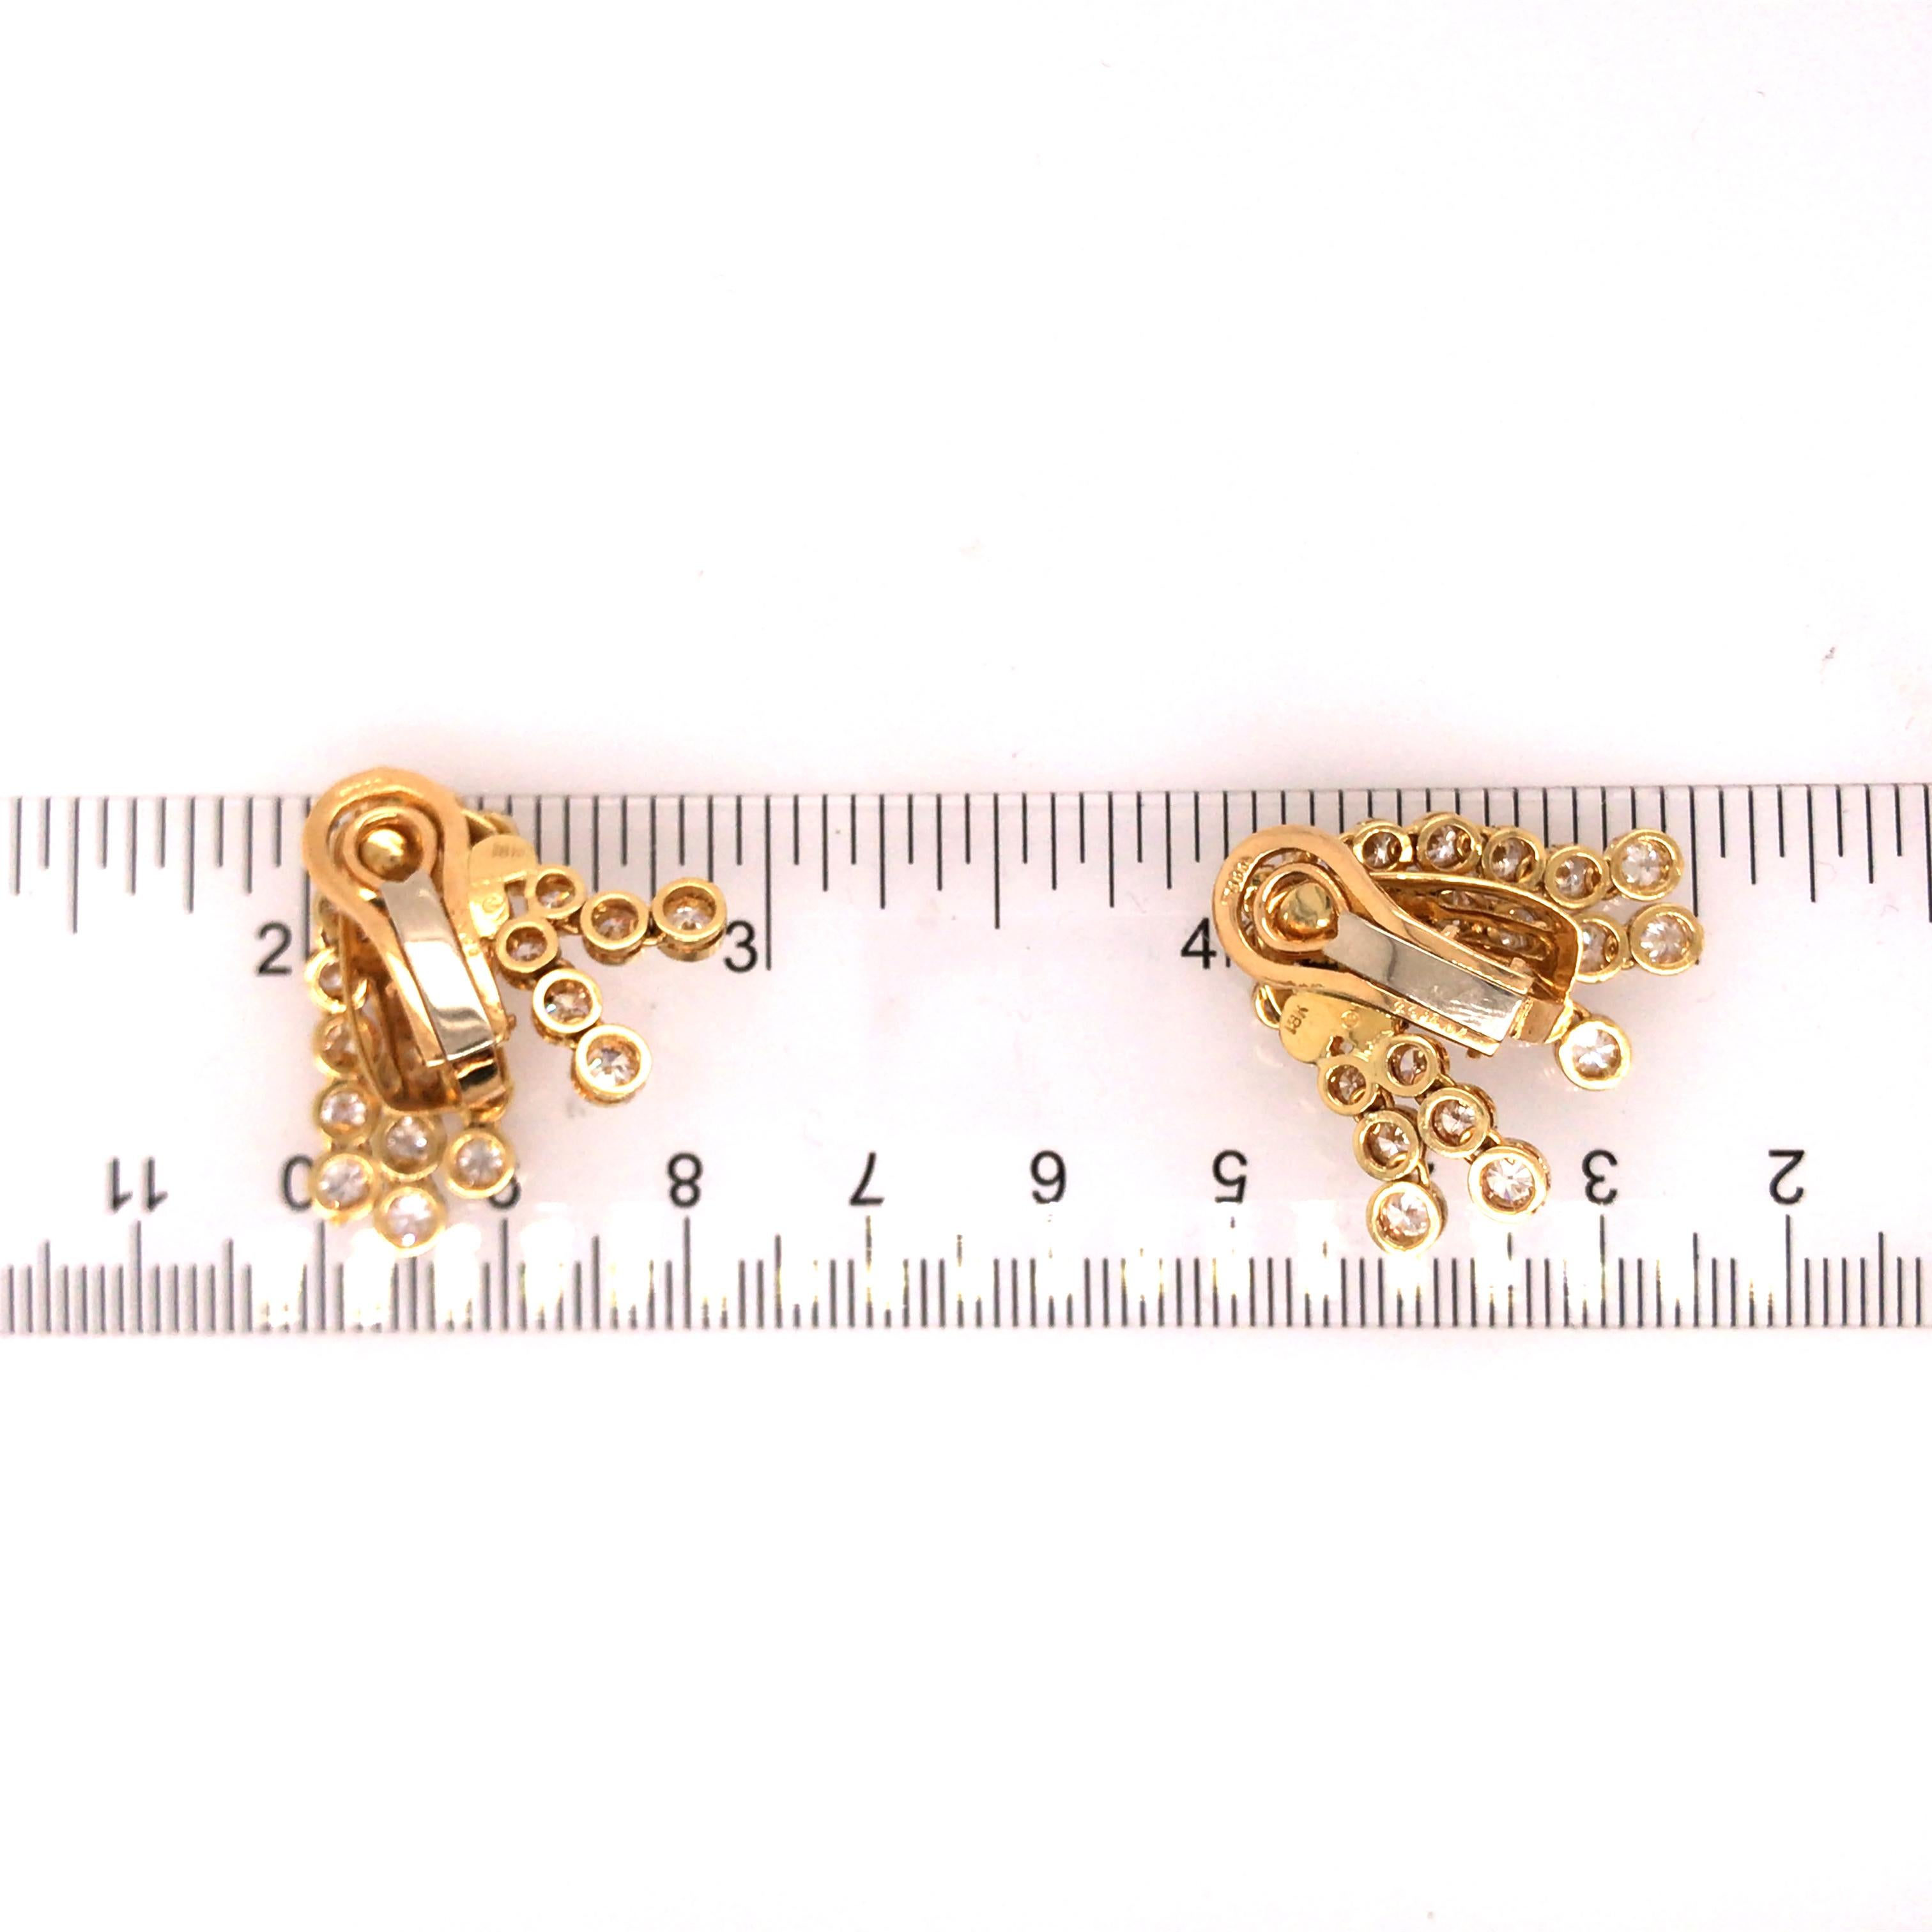 Certified Hammerman Brothers 18K Yellow Gold Diamond Earrings In Excellent Condition For Sale In Boca Raton, FL